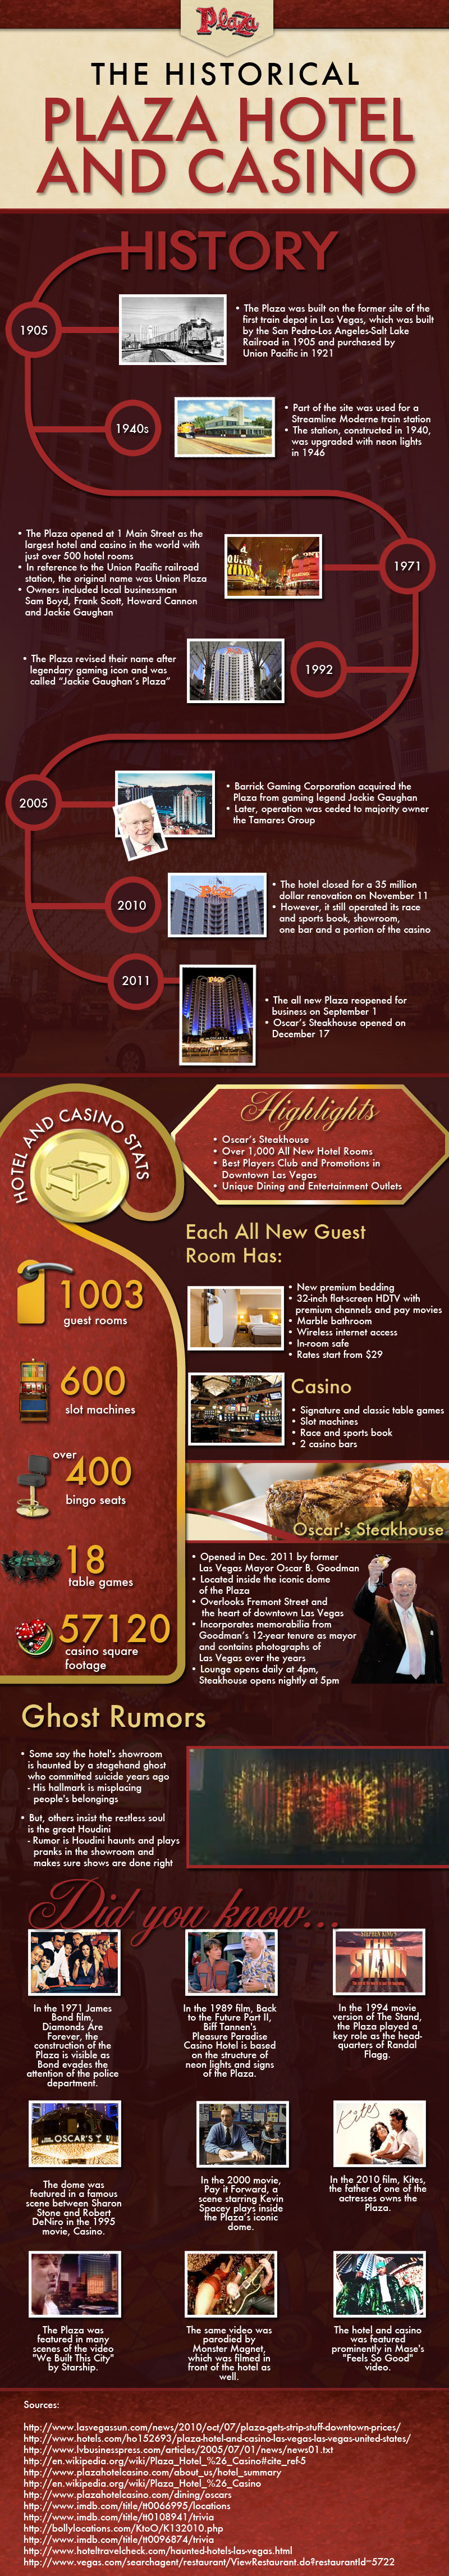 Infographic for the Plaza Hotel & Casino Downtown Las Vegas